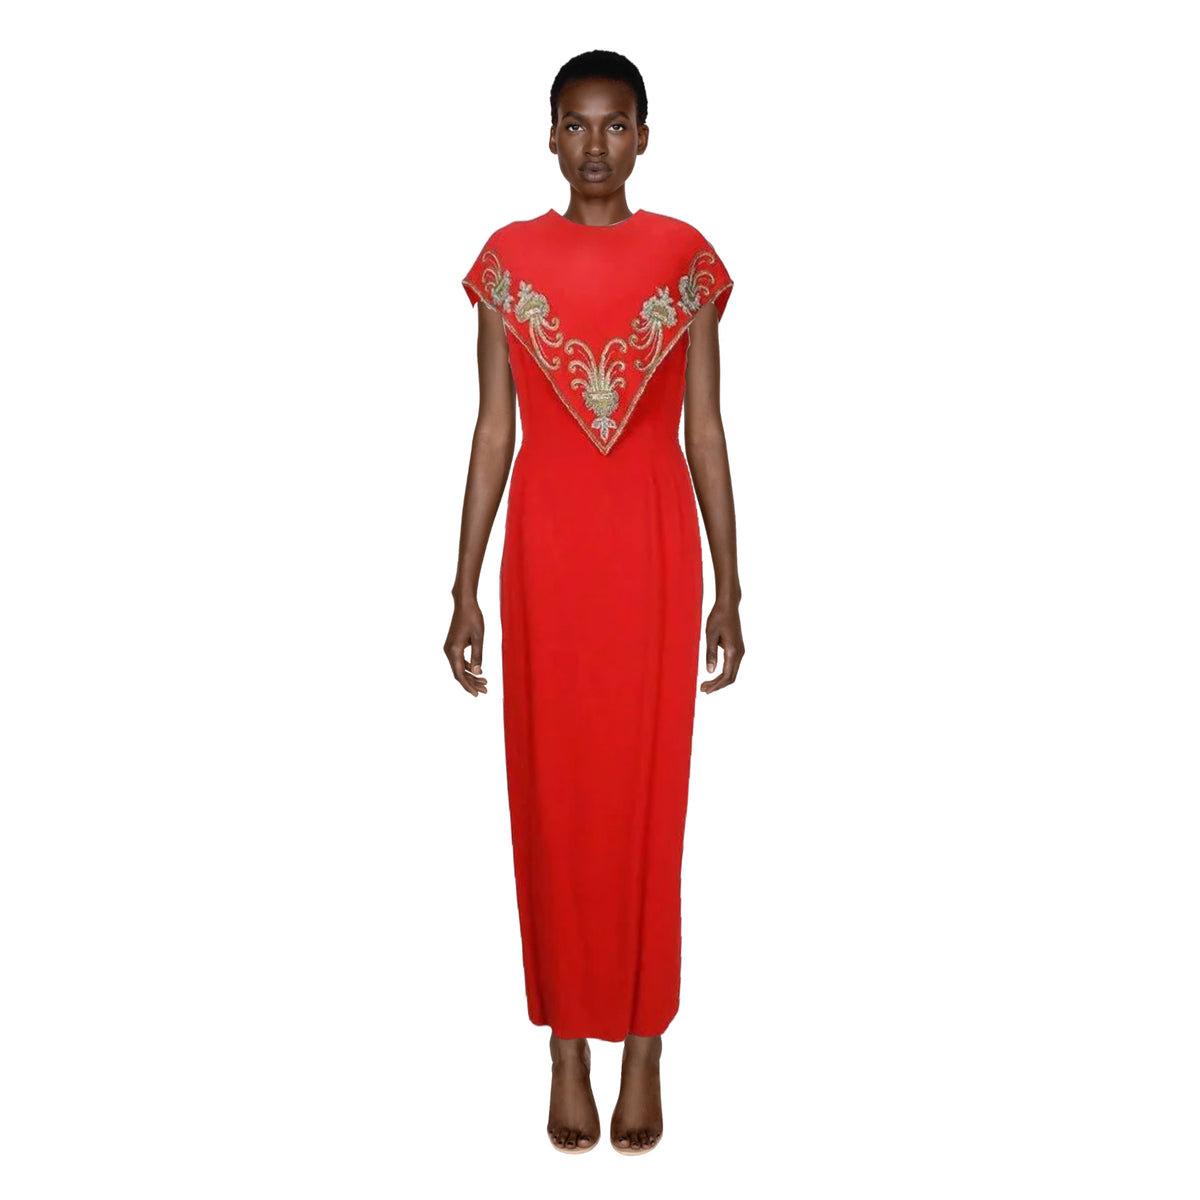 Mr. Blackwell Embellished Red Gown and Matching Caplet | Size M